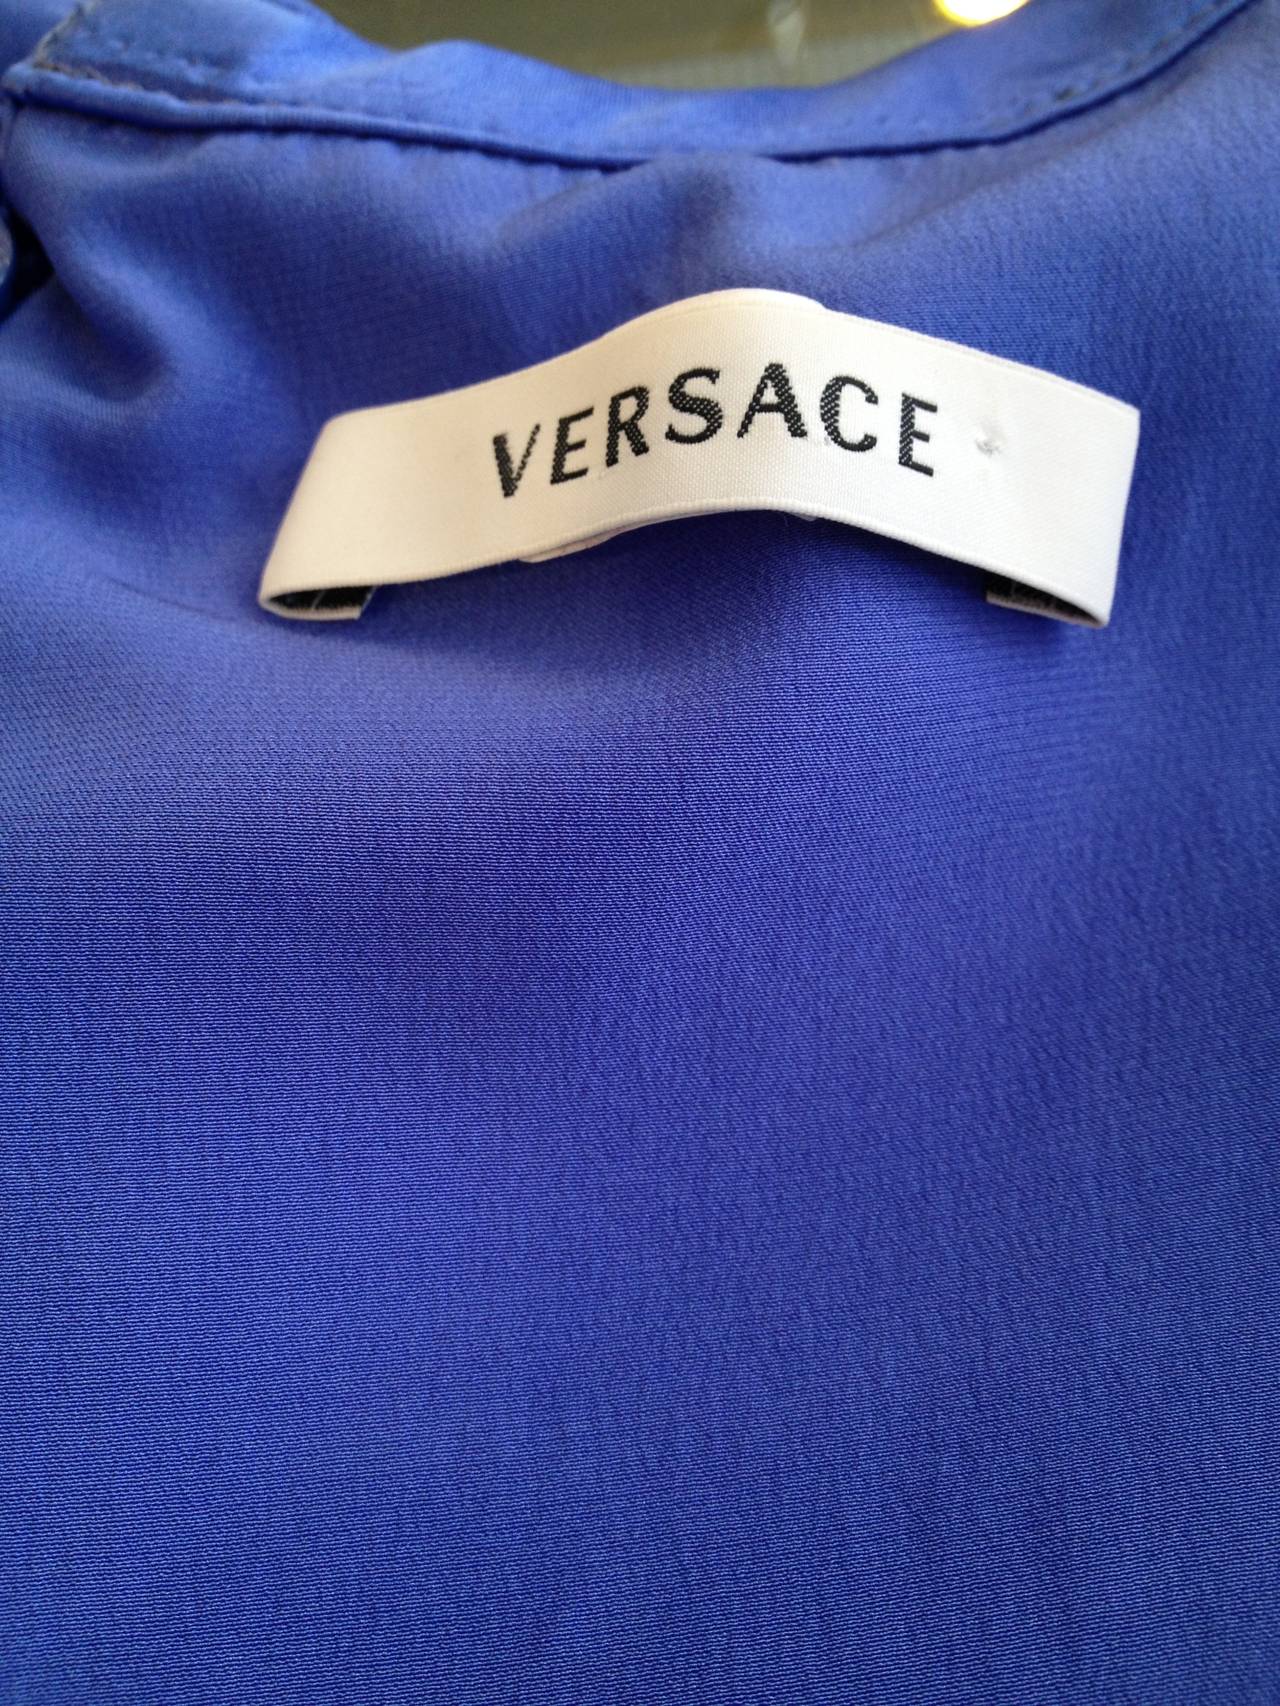 Women's Versace Periwinkle Blue Ruched Dress